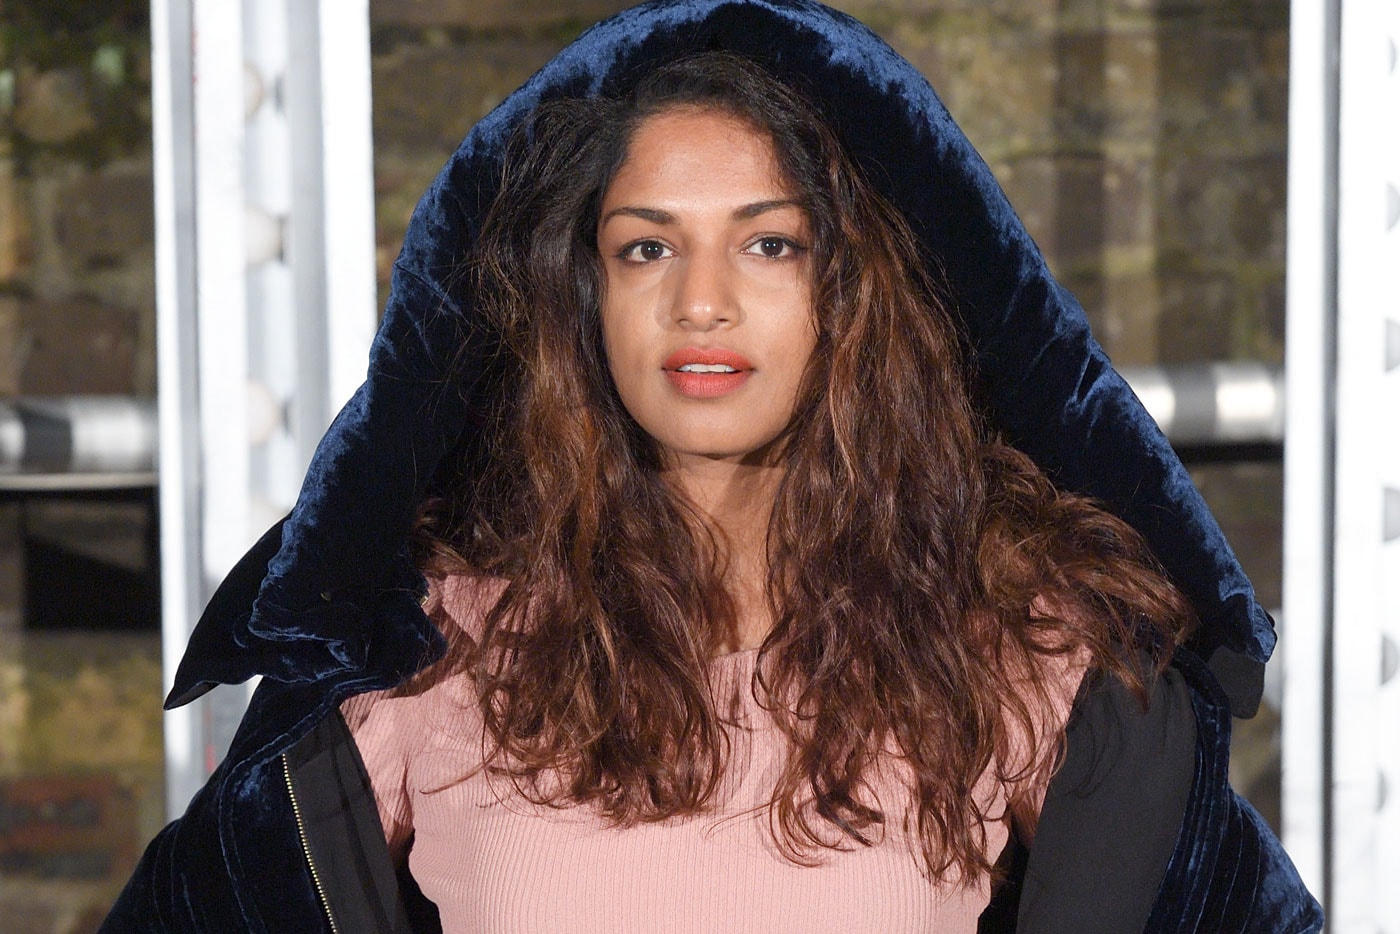 See M.I.A. Rap Over "Turn Down For What"